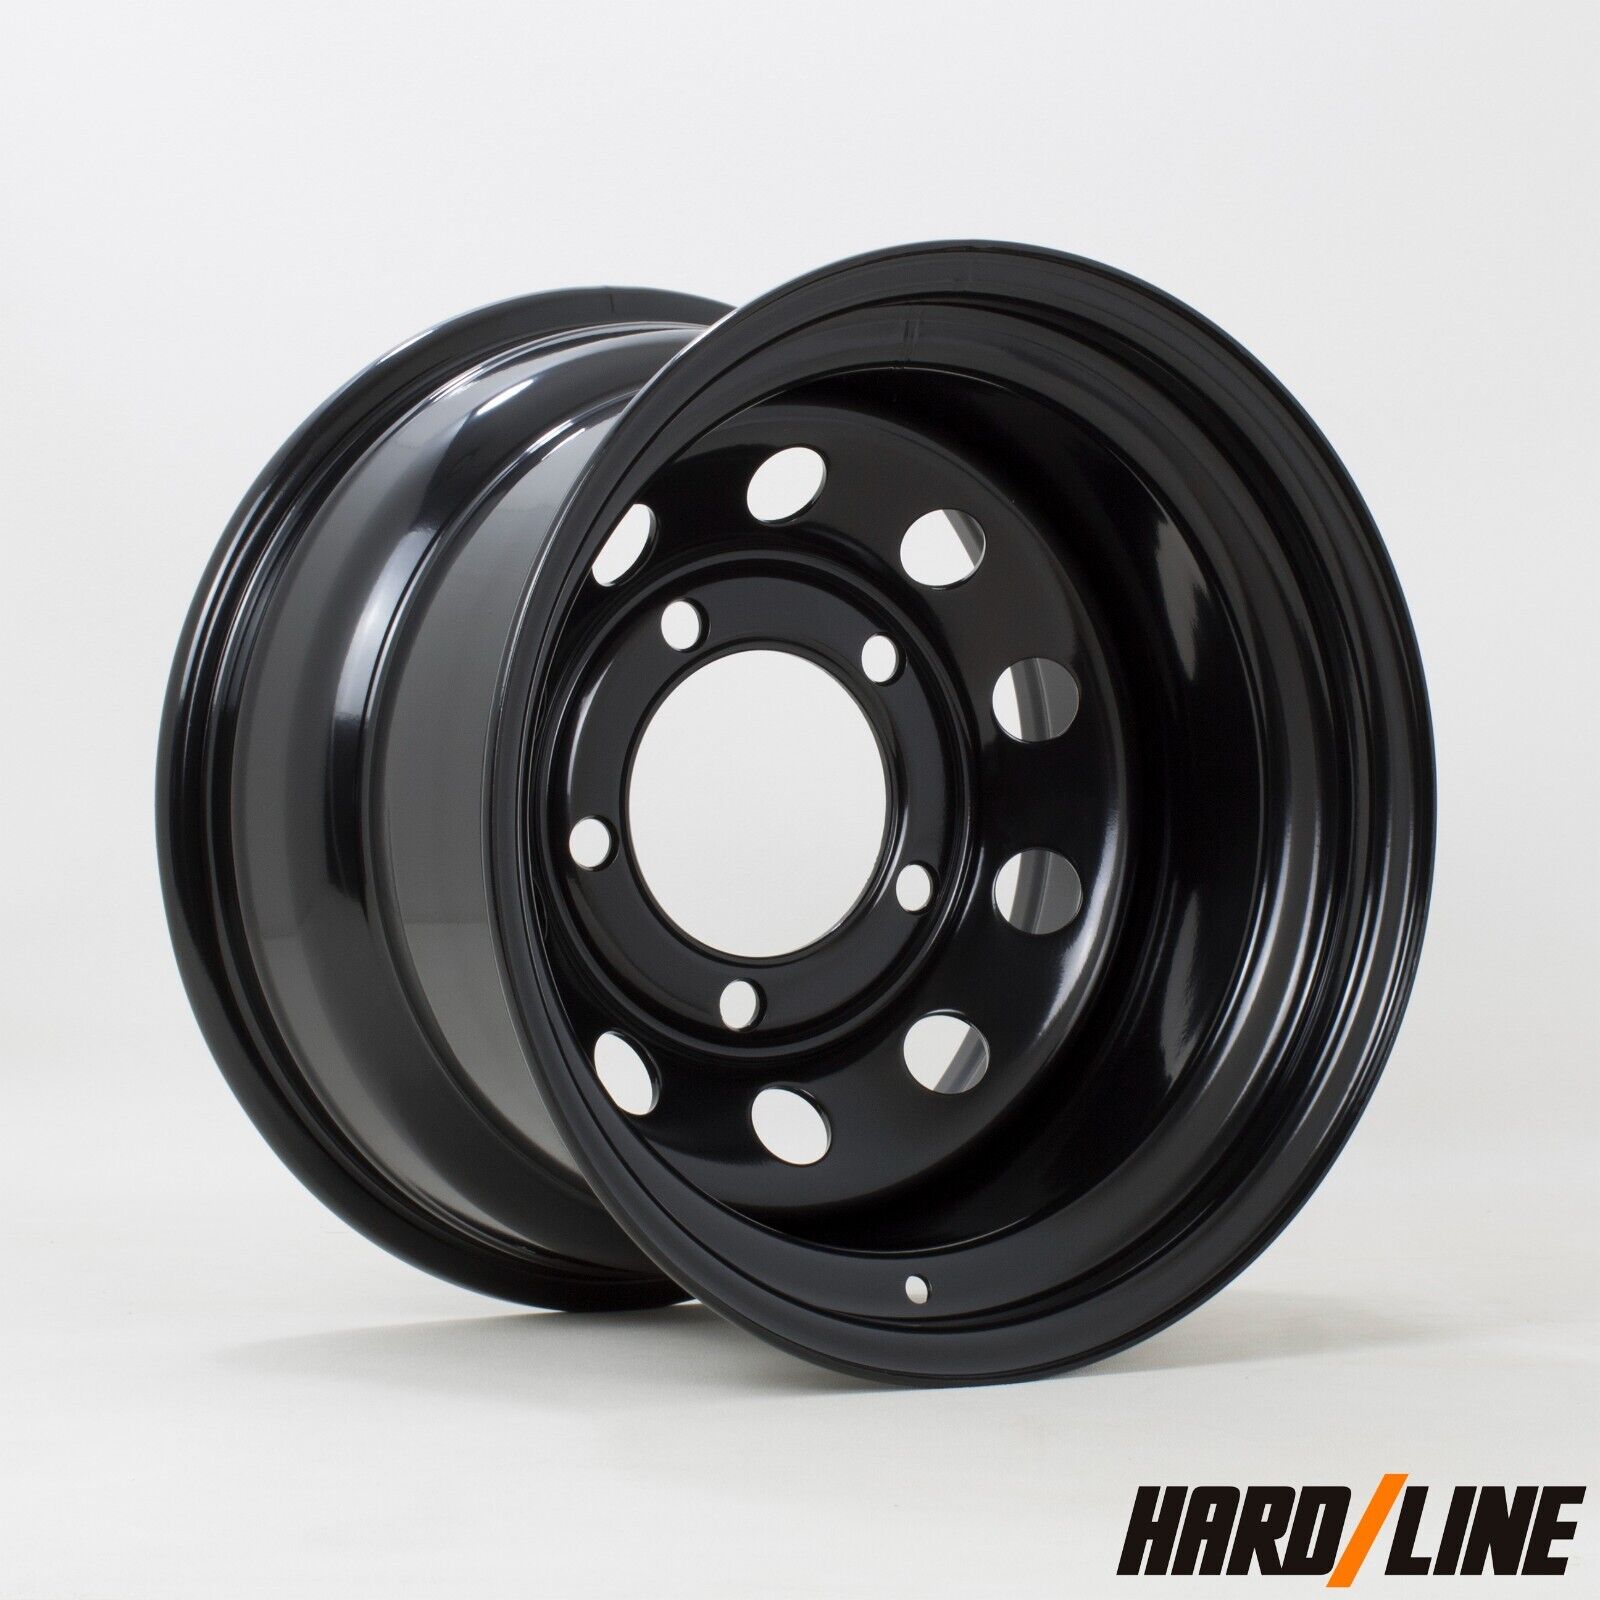 Hardline 16" x 8"  Steel Wheel 5x120 ET-25  fit Land Rover Discovery 2 98-04